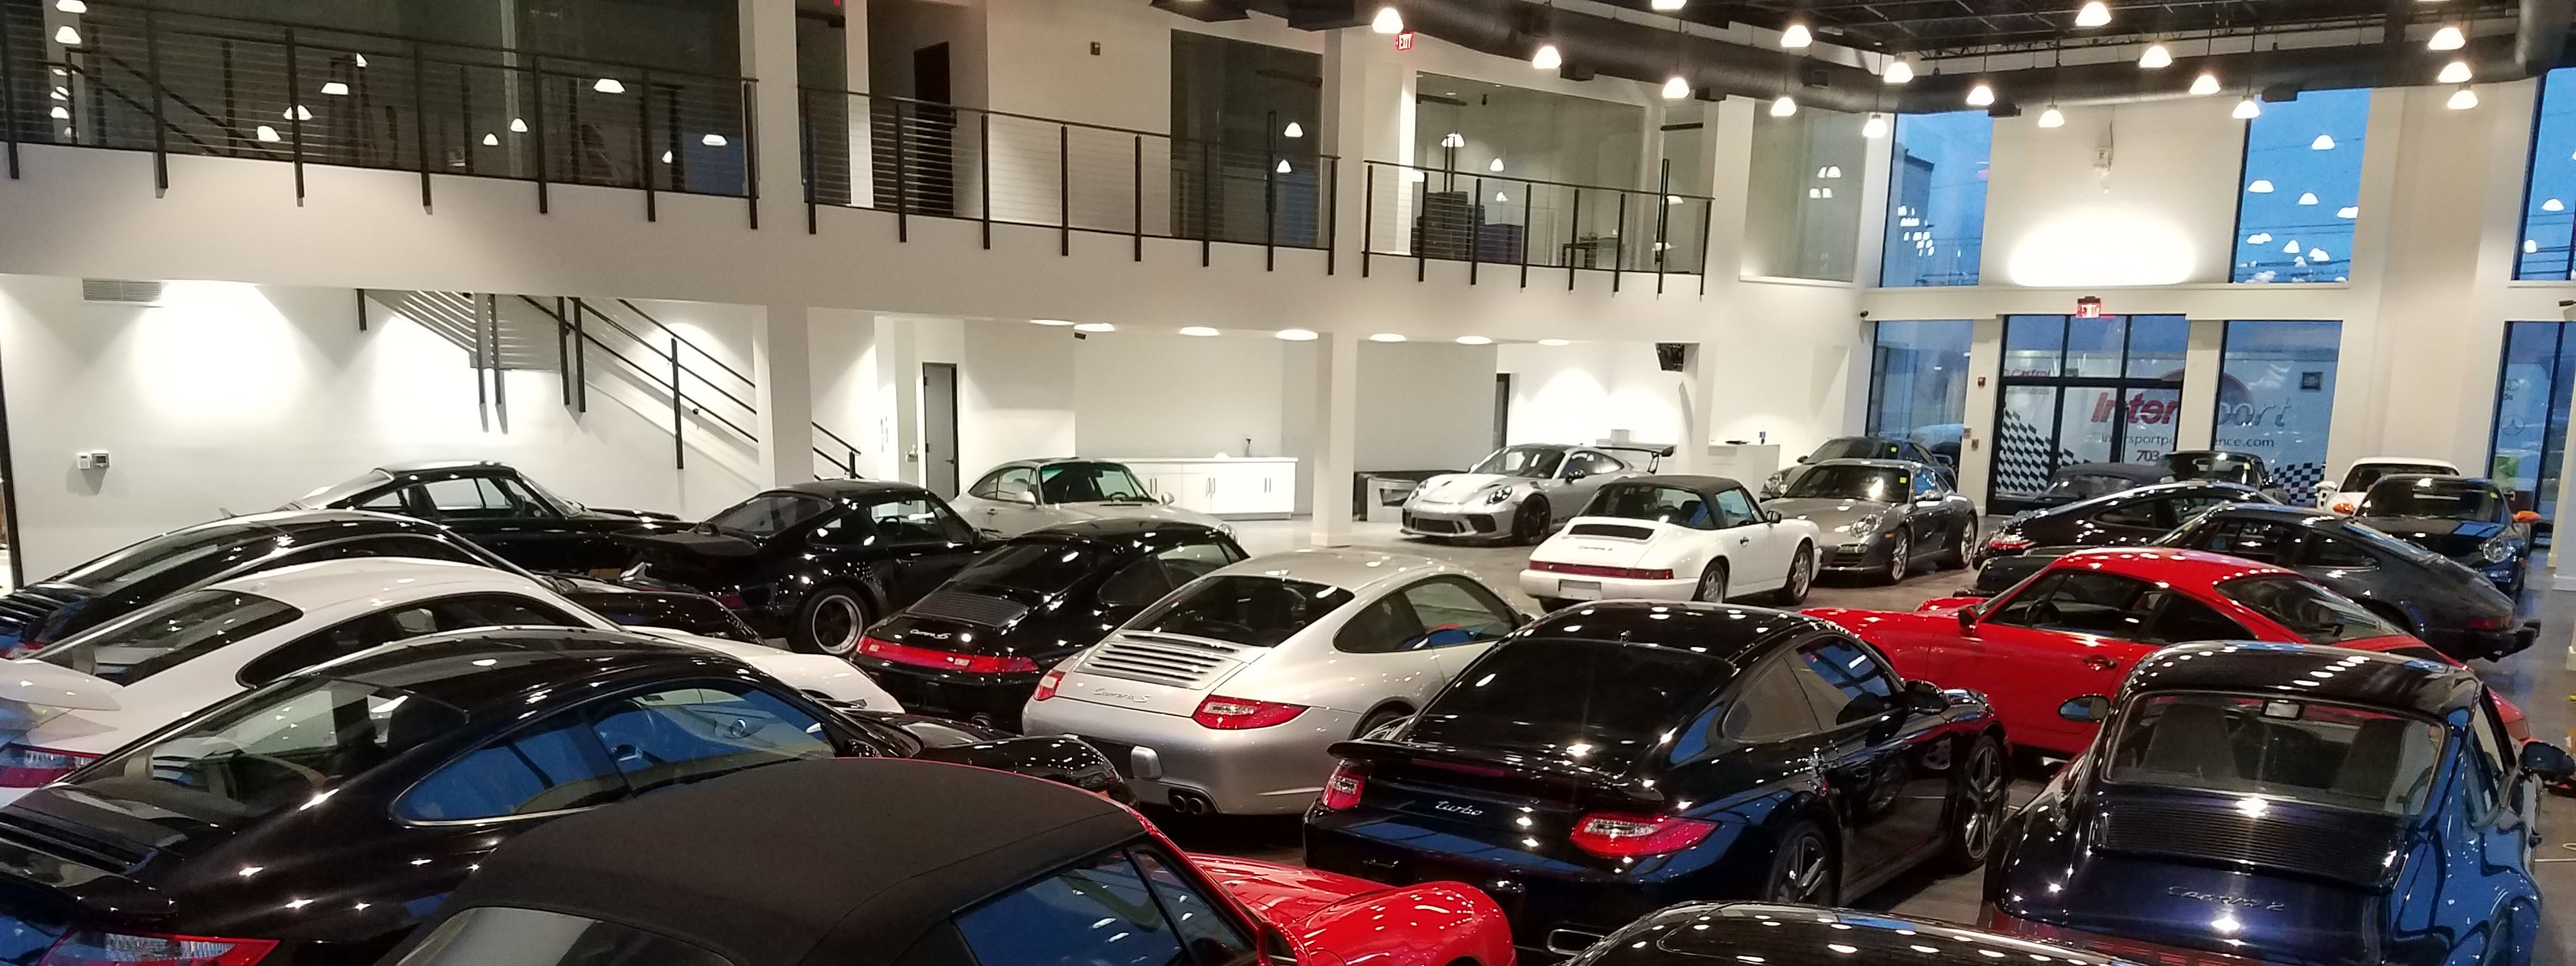 Visit our pre-owned, collector car showroom in Ashburn or call (703) 242-8680 to schedule a service appointment for your British, German or Italian sports car at one of our two locations in Ashburn or Tysons.